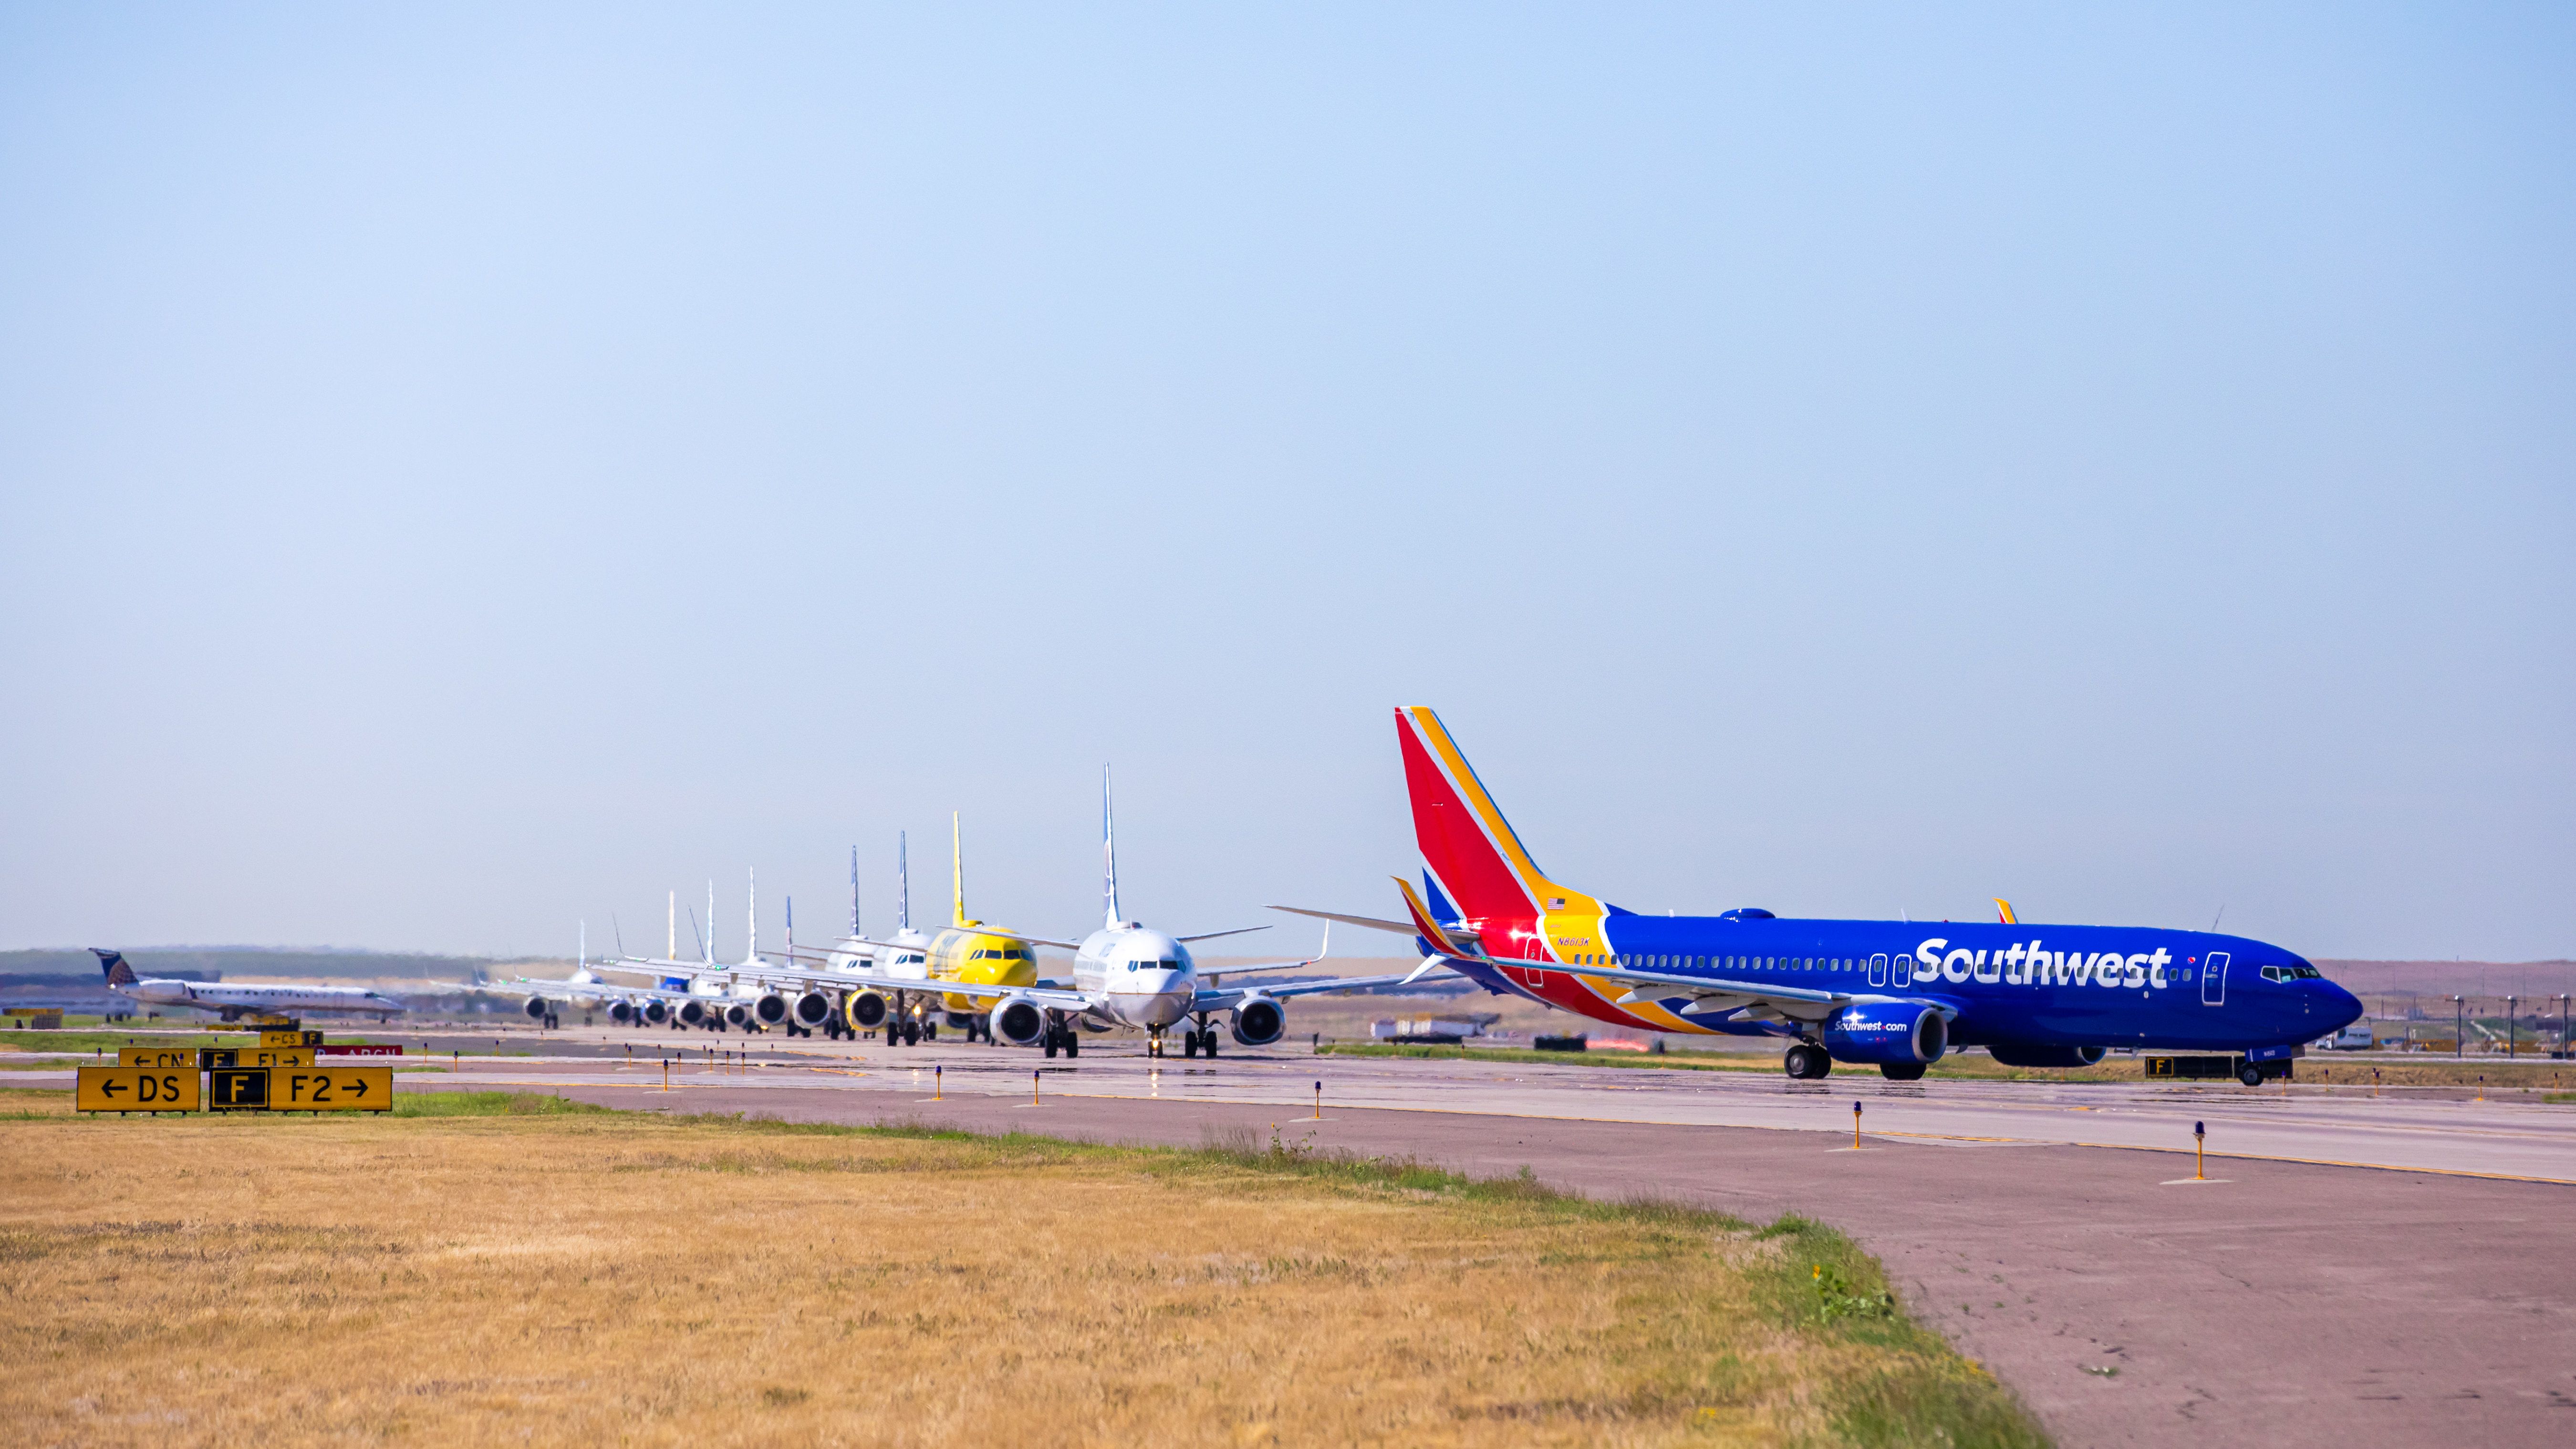 Train of aircraft with Southwest at the front PC DEN